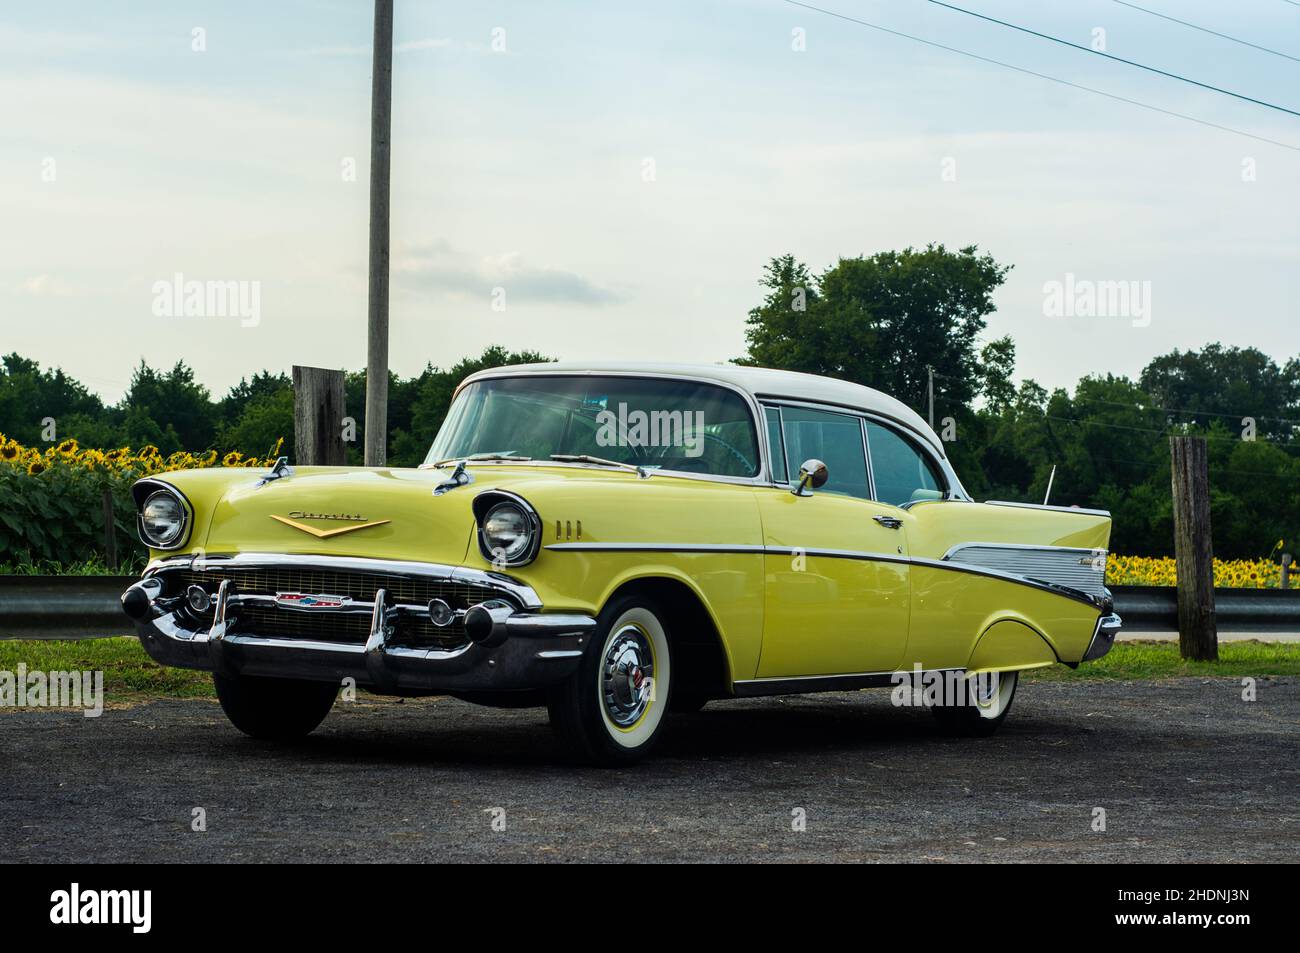 1957 Chevrolet Bel Air in front of Sunflower Fields Stock Photo